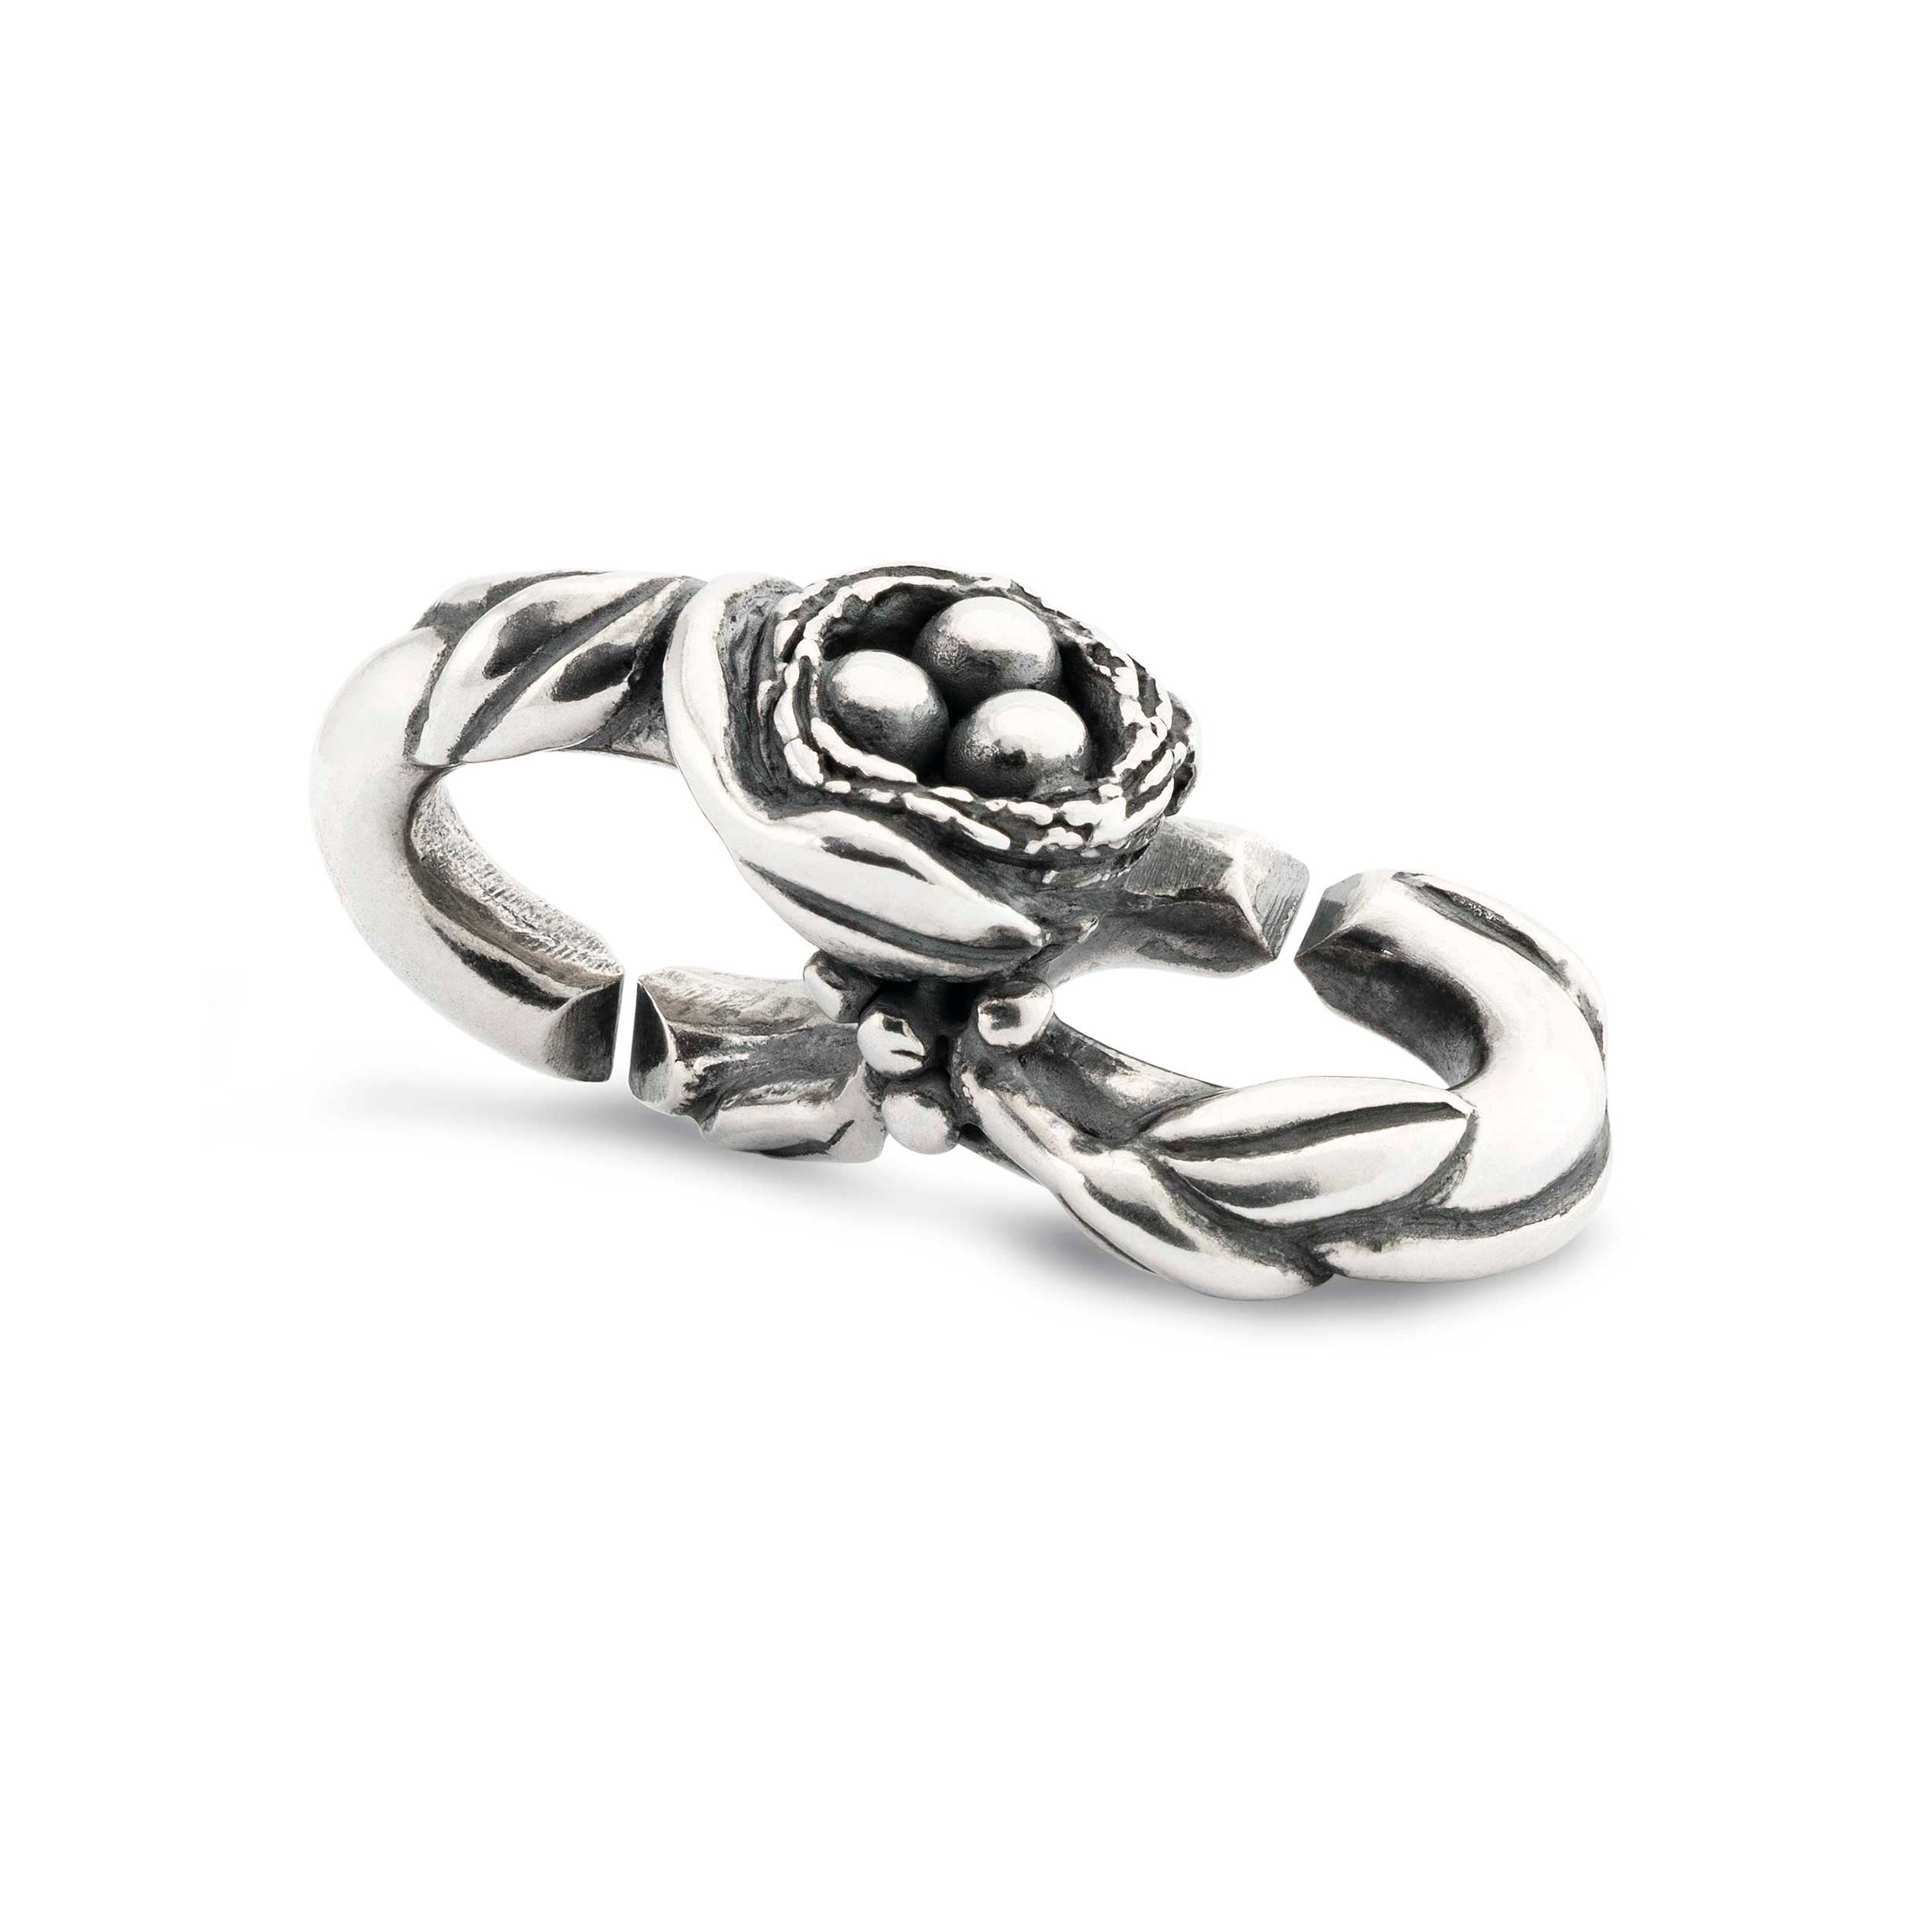 Nesting, Double Silver Link